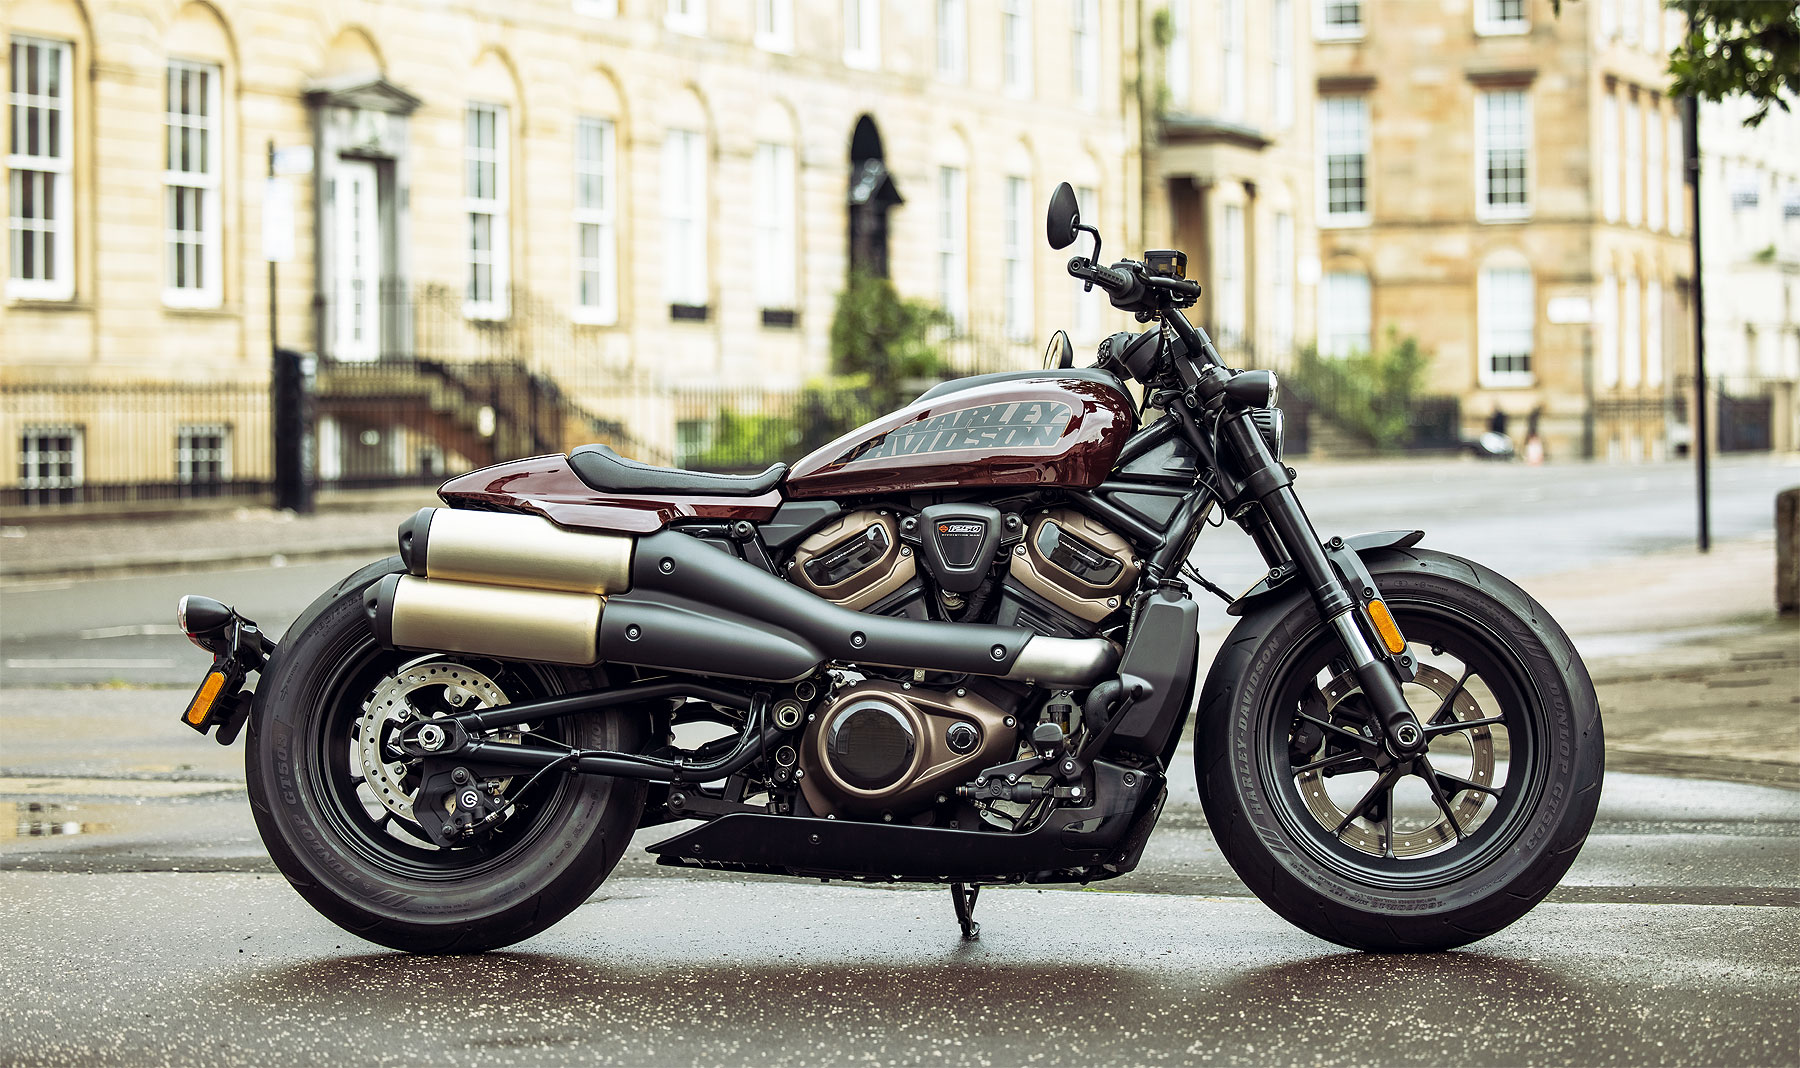 The Harley-Davidson Sportster S Marks A New Chapter For The Iconic Brand